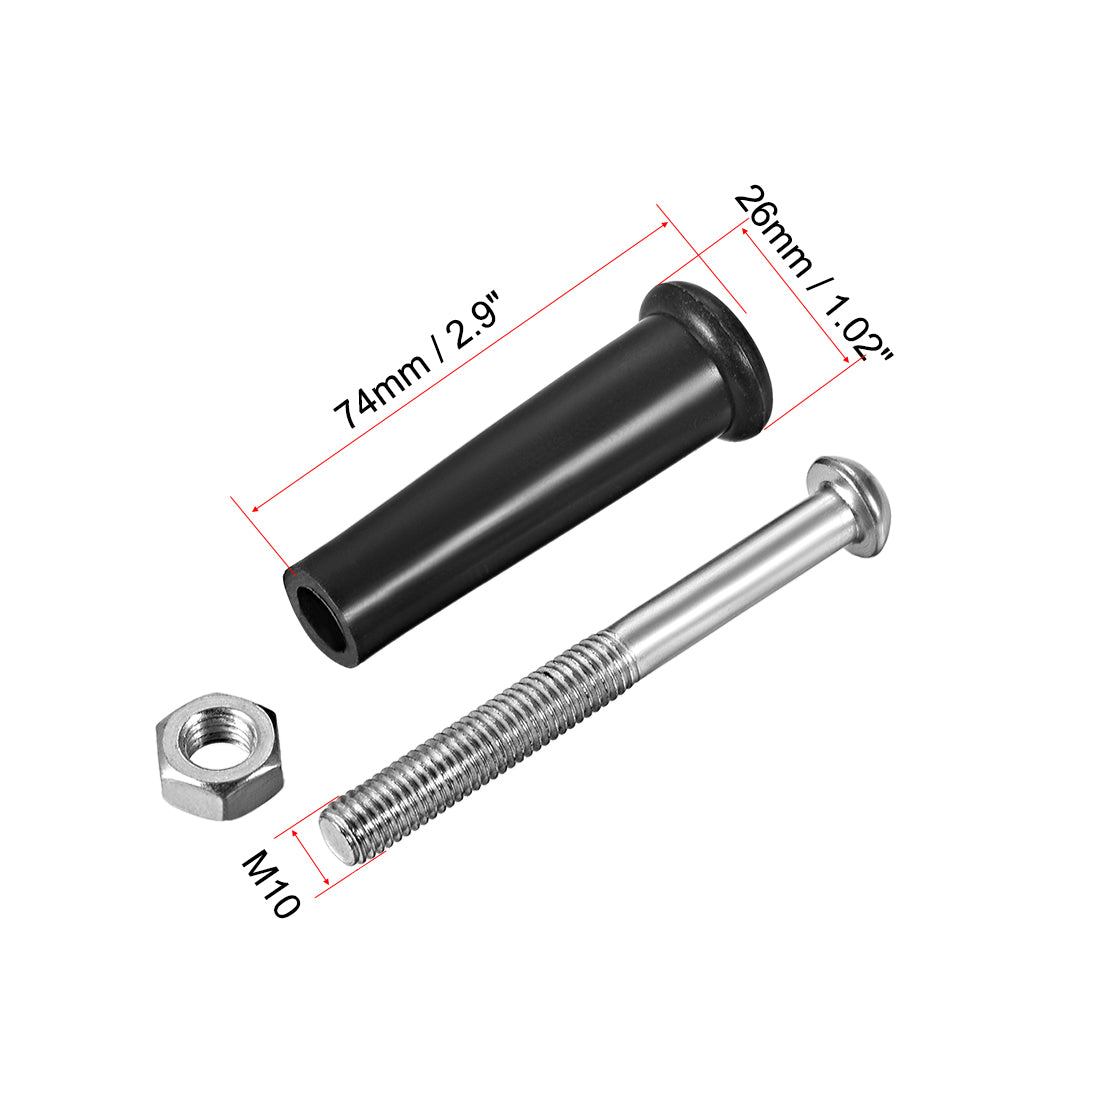 uxcell Uxcell Clamping Handles Screw Knobs M10 Threaded Plastic Metal Revolving Handle Grip 2pcs